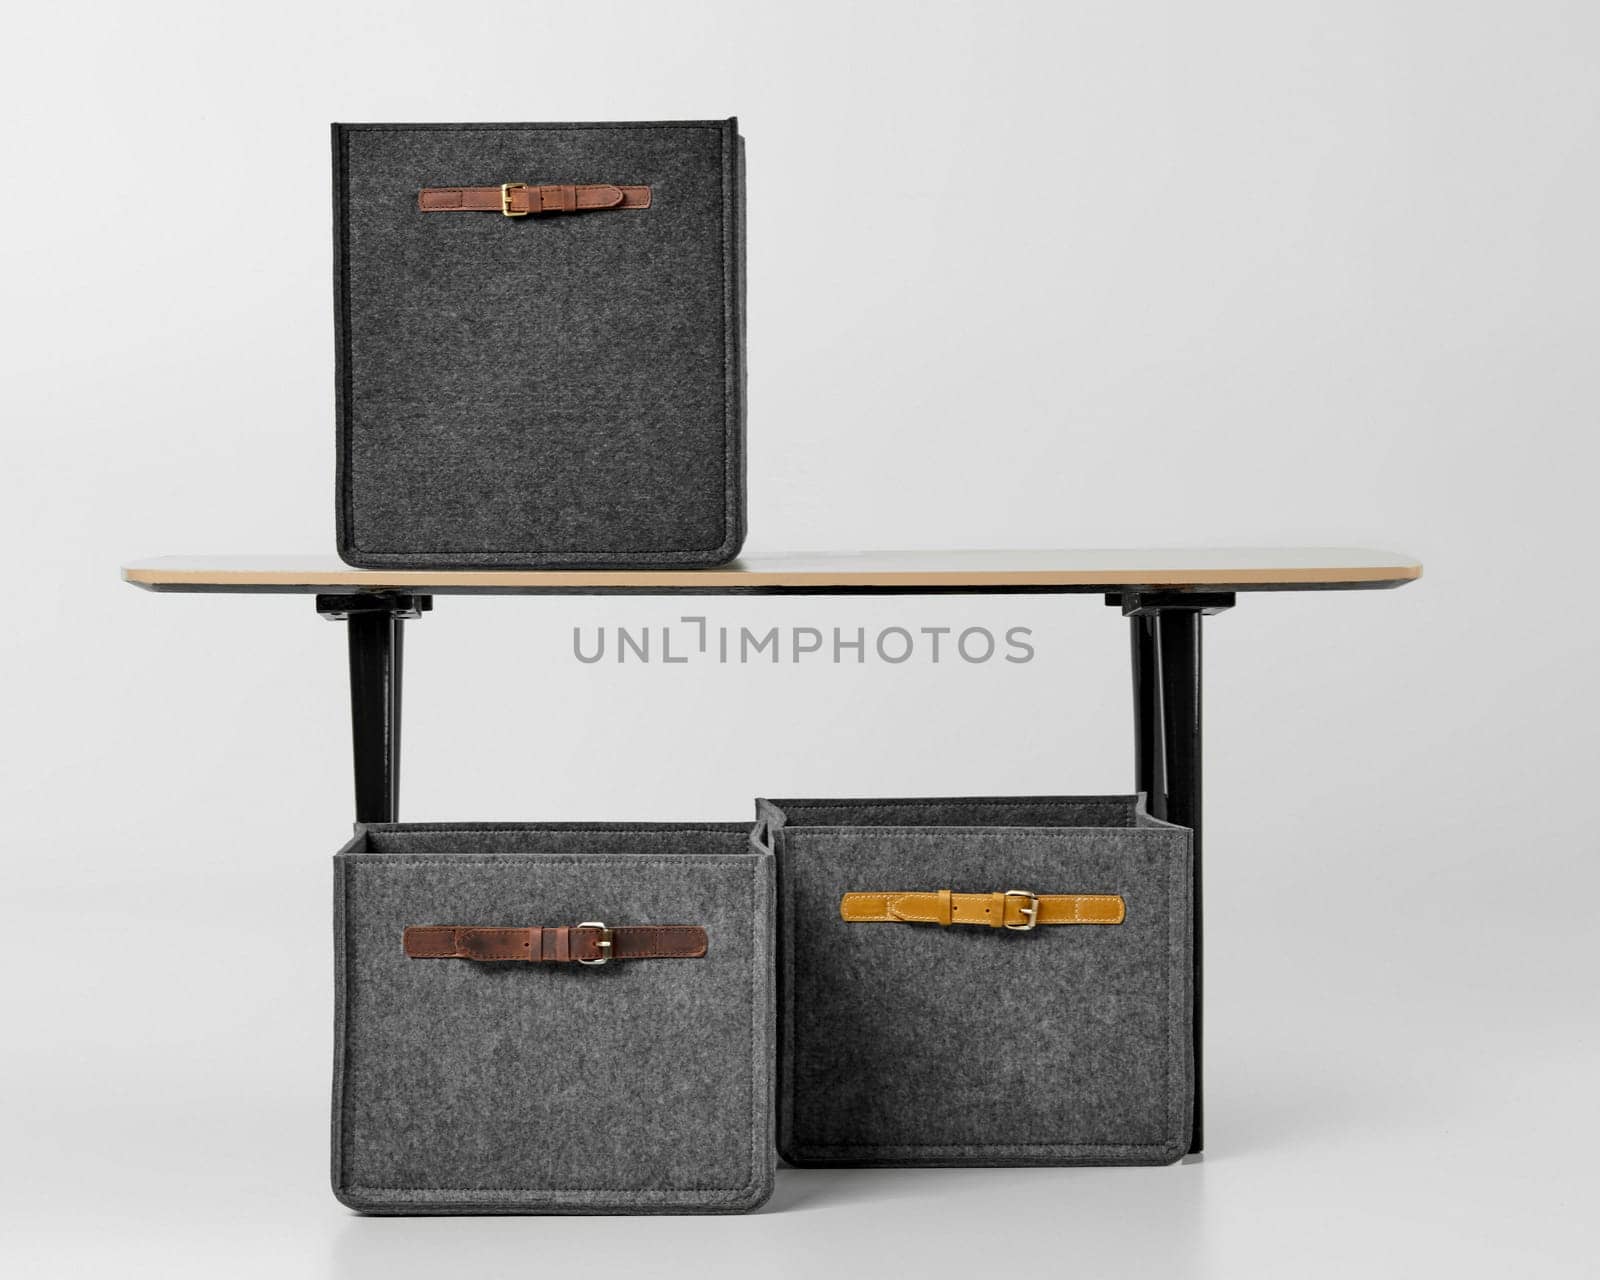 Handcrafted grey felt boxes with applied leather handles arranged by simple desk. Stylish accessory for organizing office space and storing stationery and documents